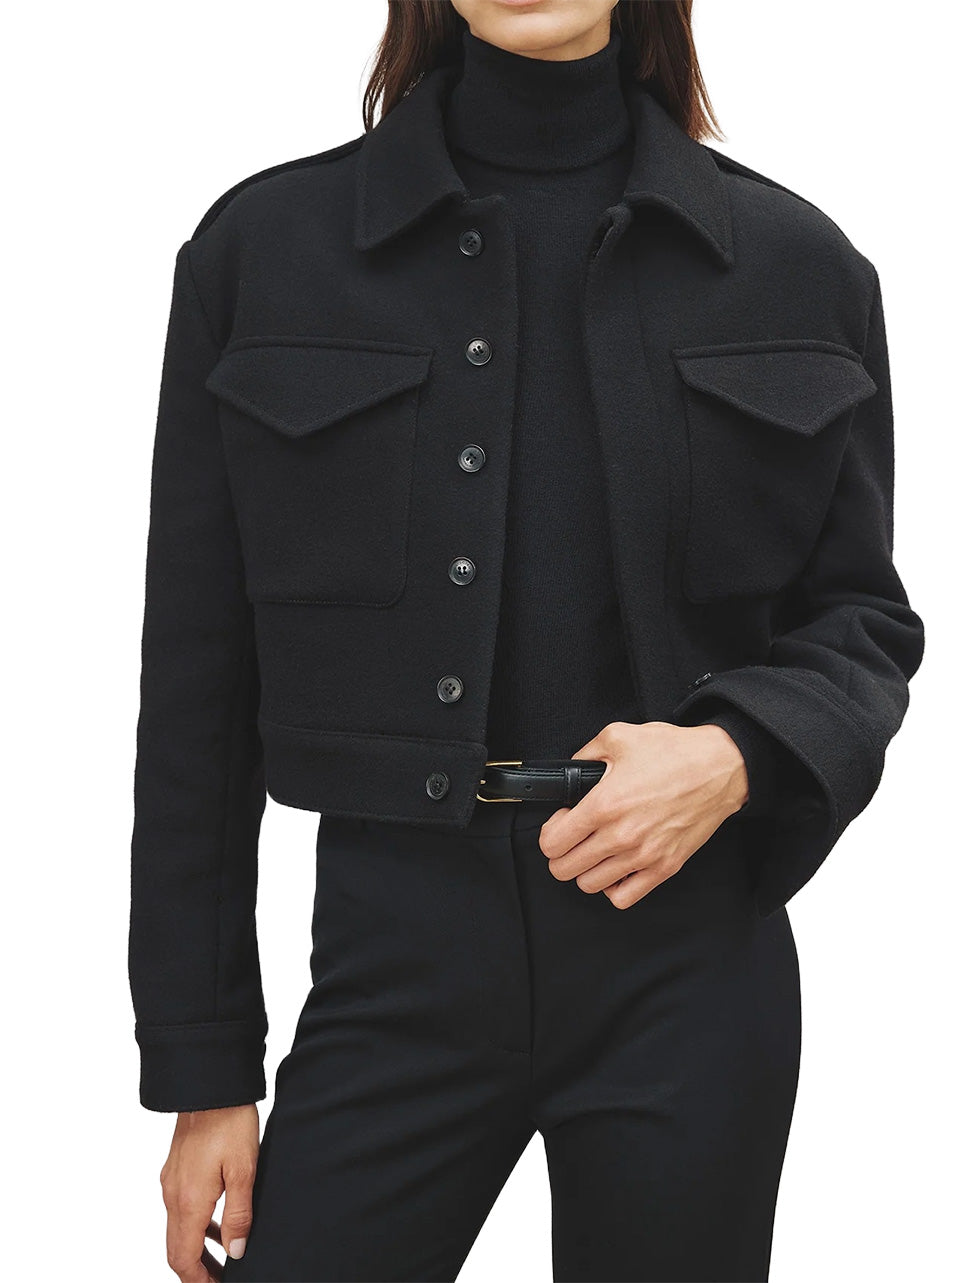 Horace Military Jacket in Black